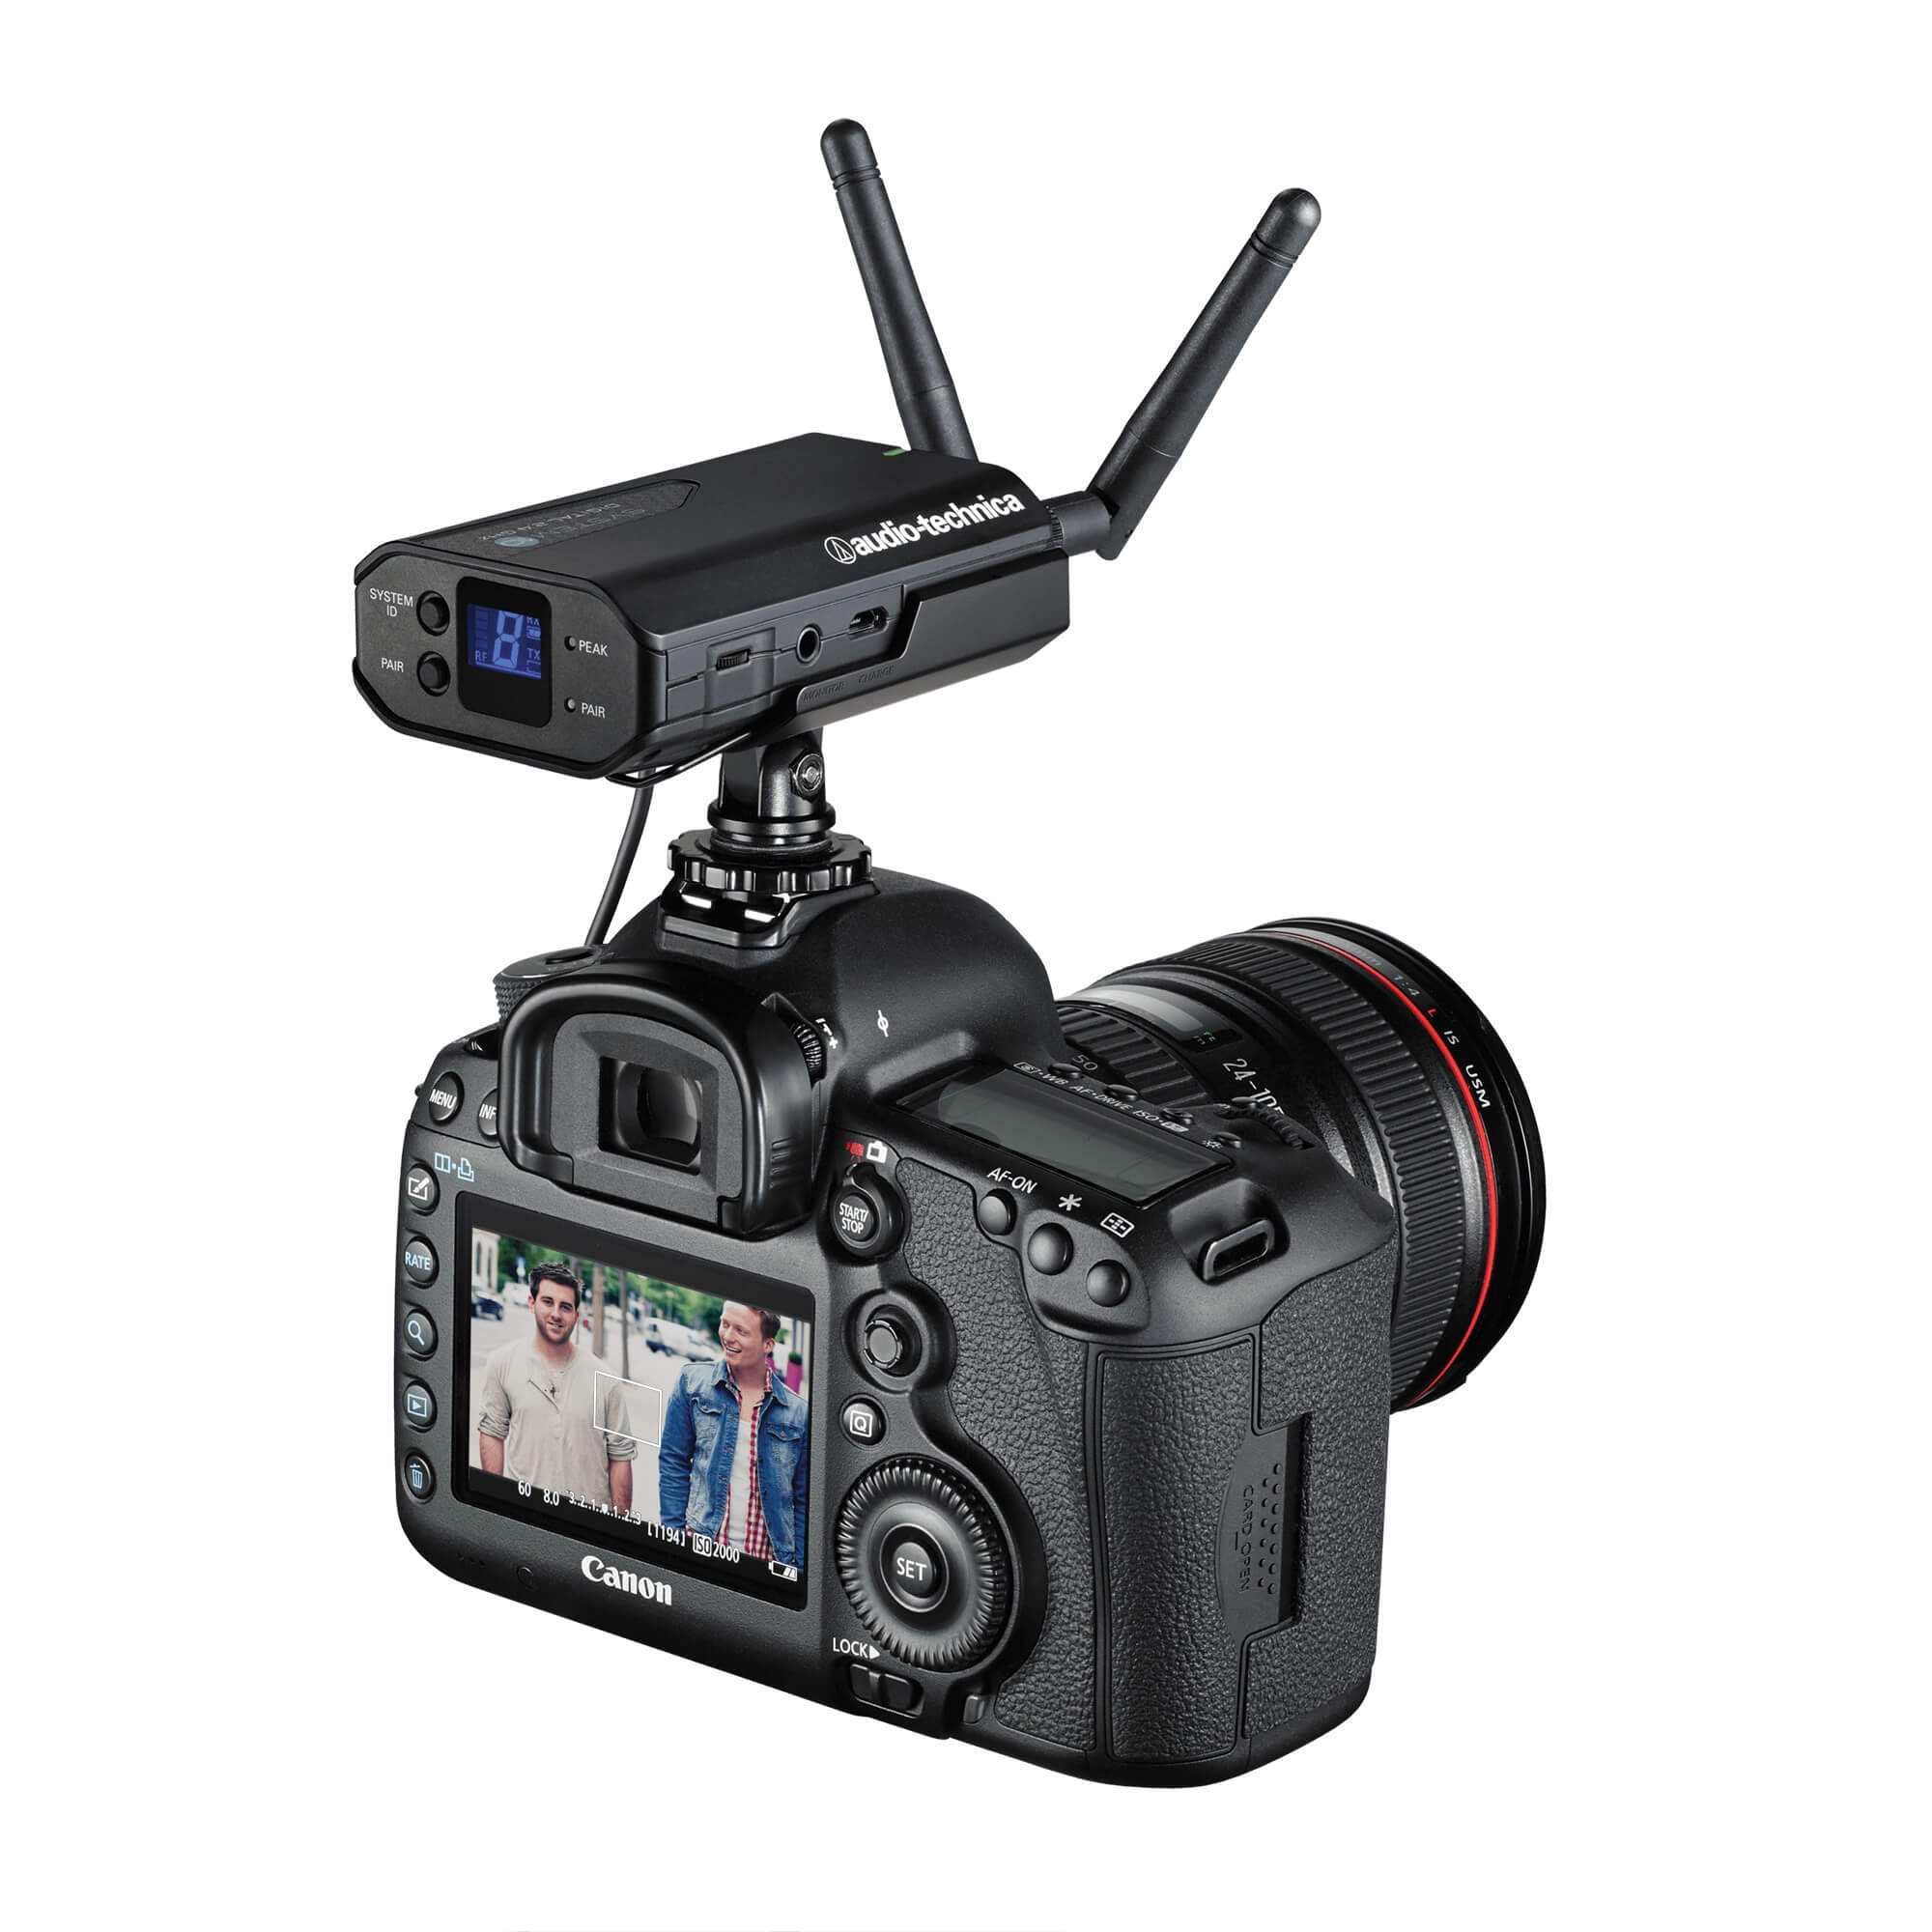 Audio-Technica System 10 Digital Wireless ATW-R1700 Receiver, mounted on a DSLR